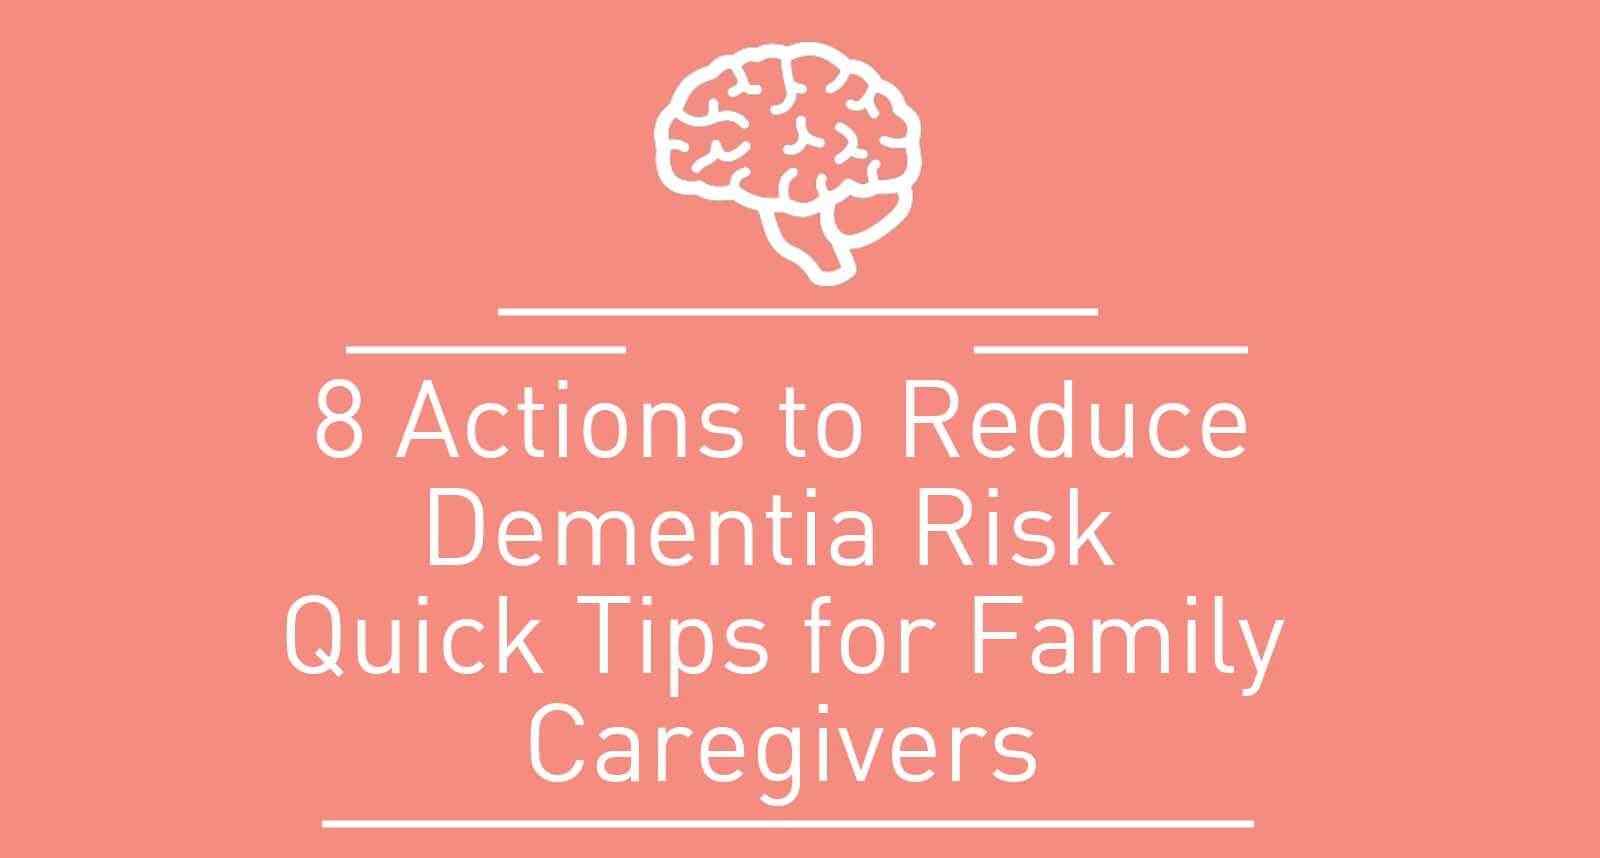 8 Ways to Reduce the Risk of Dementia